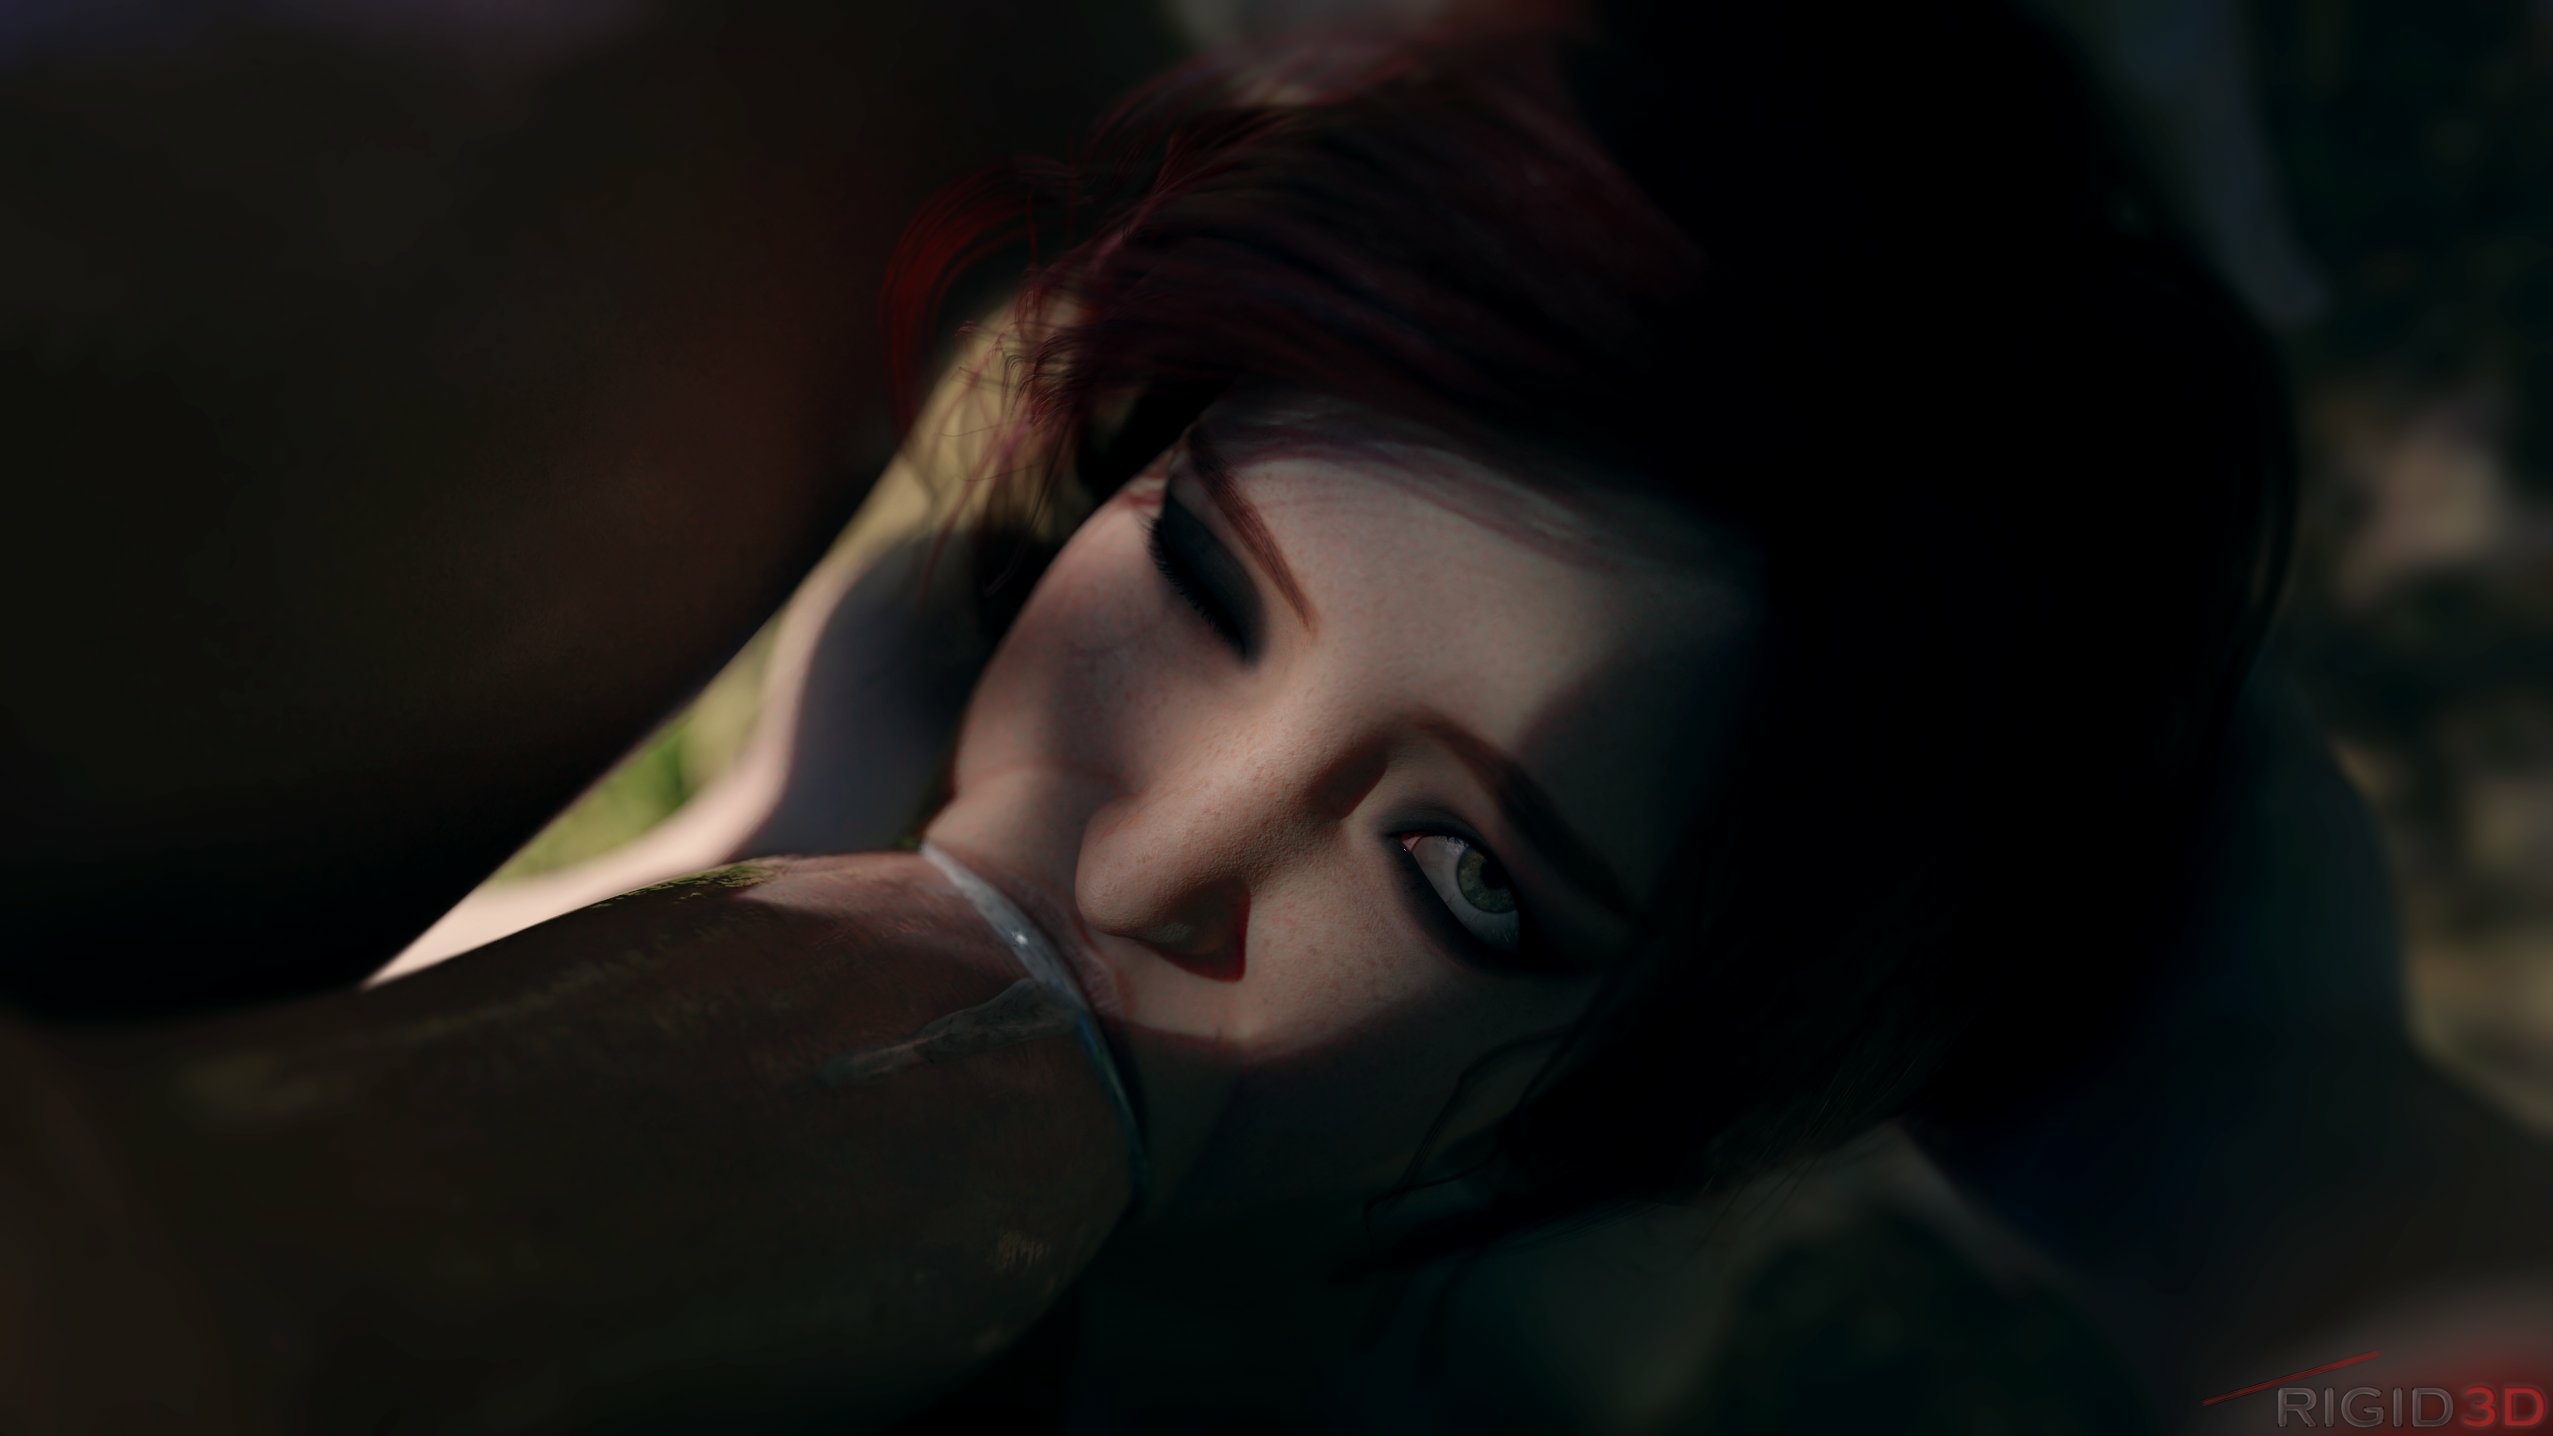 More Triss x Yen renders here Triss Merigold Yennefer (witcher) The Witcher Eating Pussy Pussy Licking Fully Naked Futanari Futa Futa On Female Dickgirl Big Dick Nipples Titjob Boobs Naked Pink Nipples 3d Porn Ass Big Tits Tits Sexy Horny Face 3